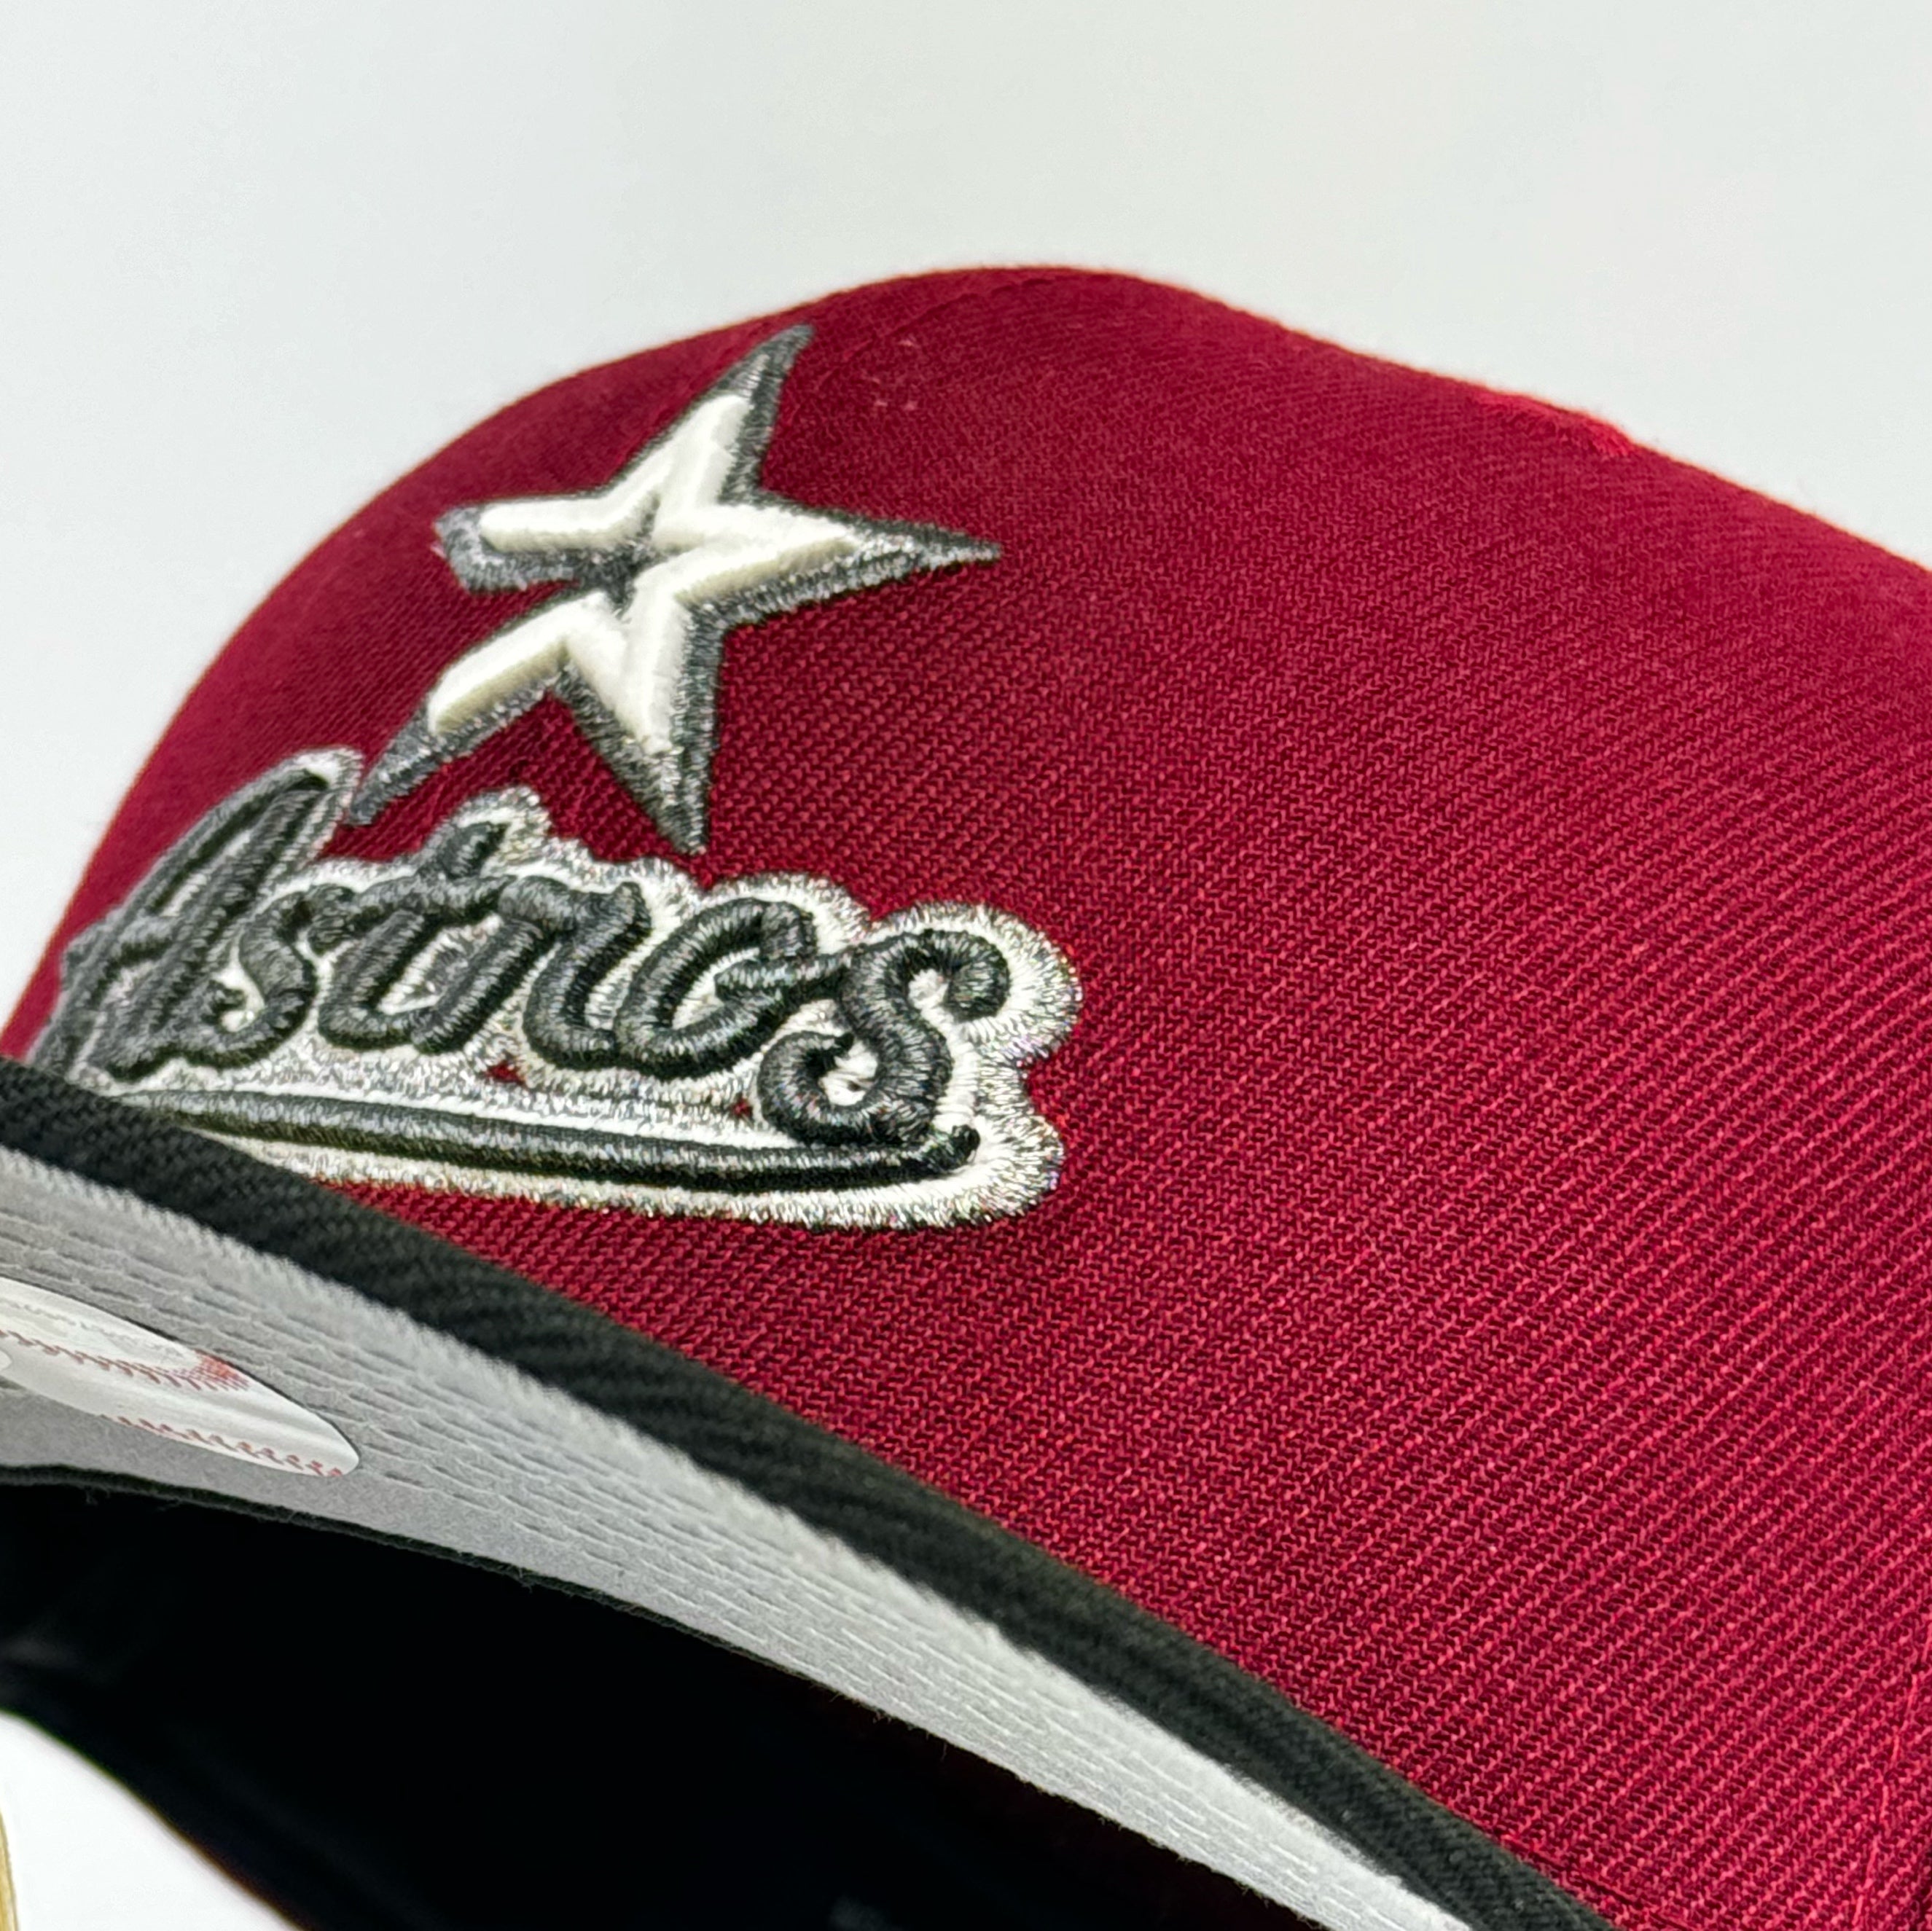 HOUSTON ASTROS (CARDINAL) (35TH ANN) NEW ERA 59FIFTY FITTED